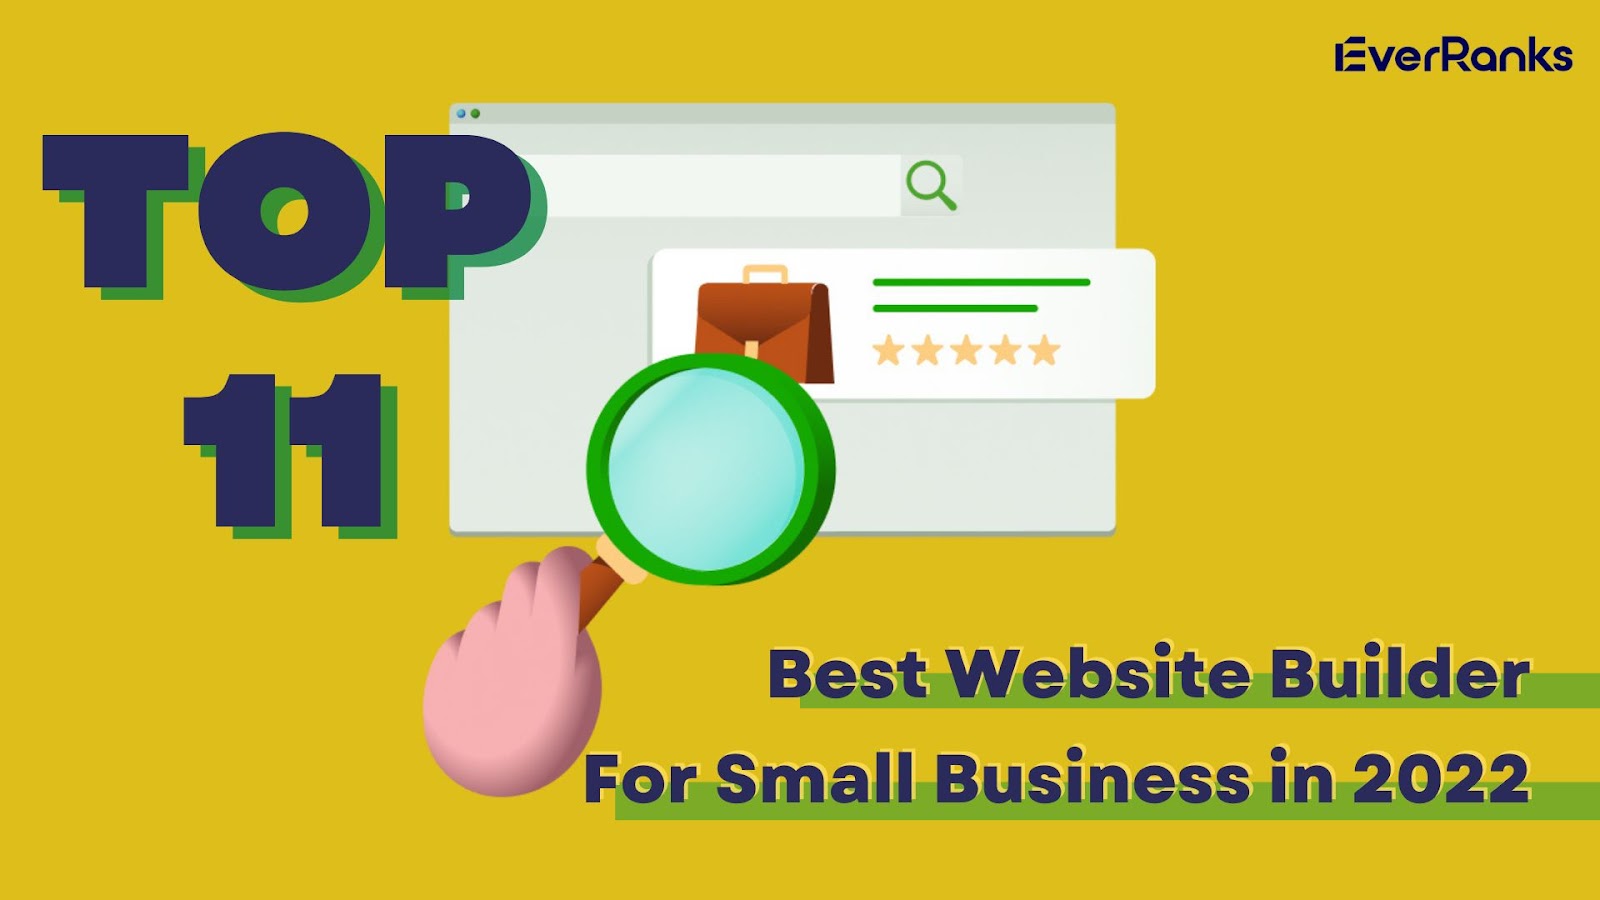 Website builders are an excellent option for small businesses with limited resources